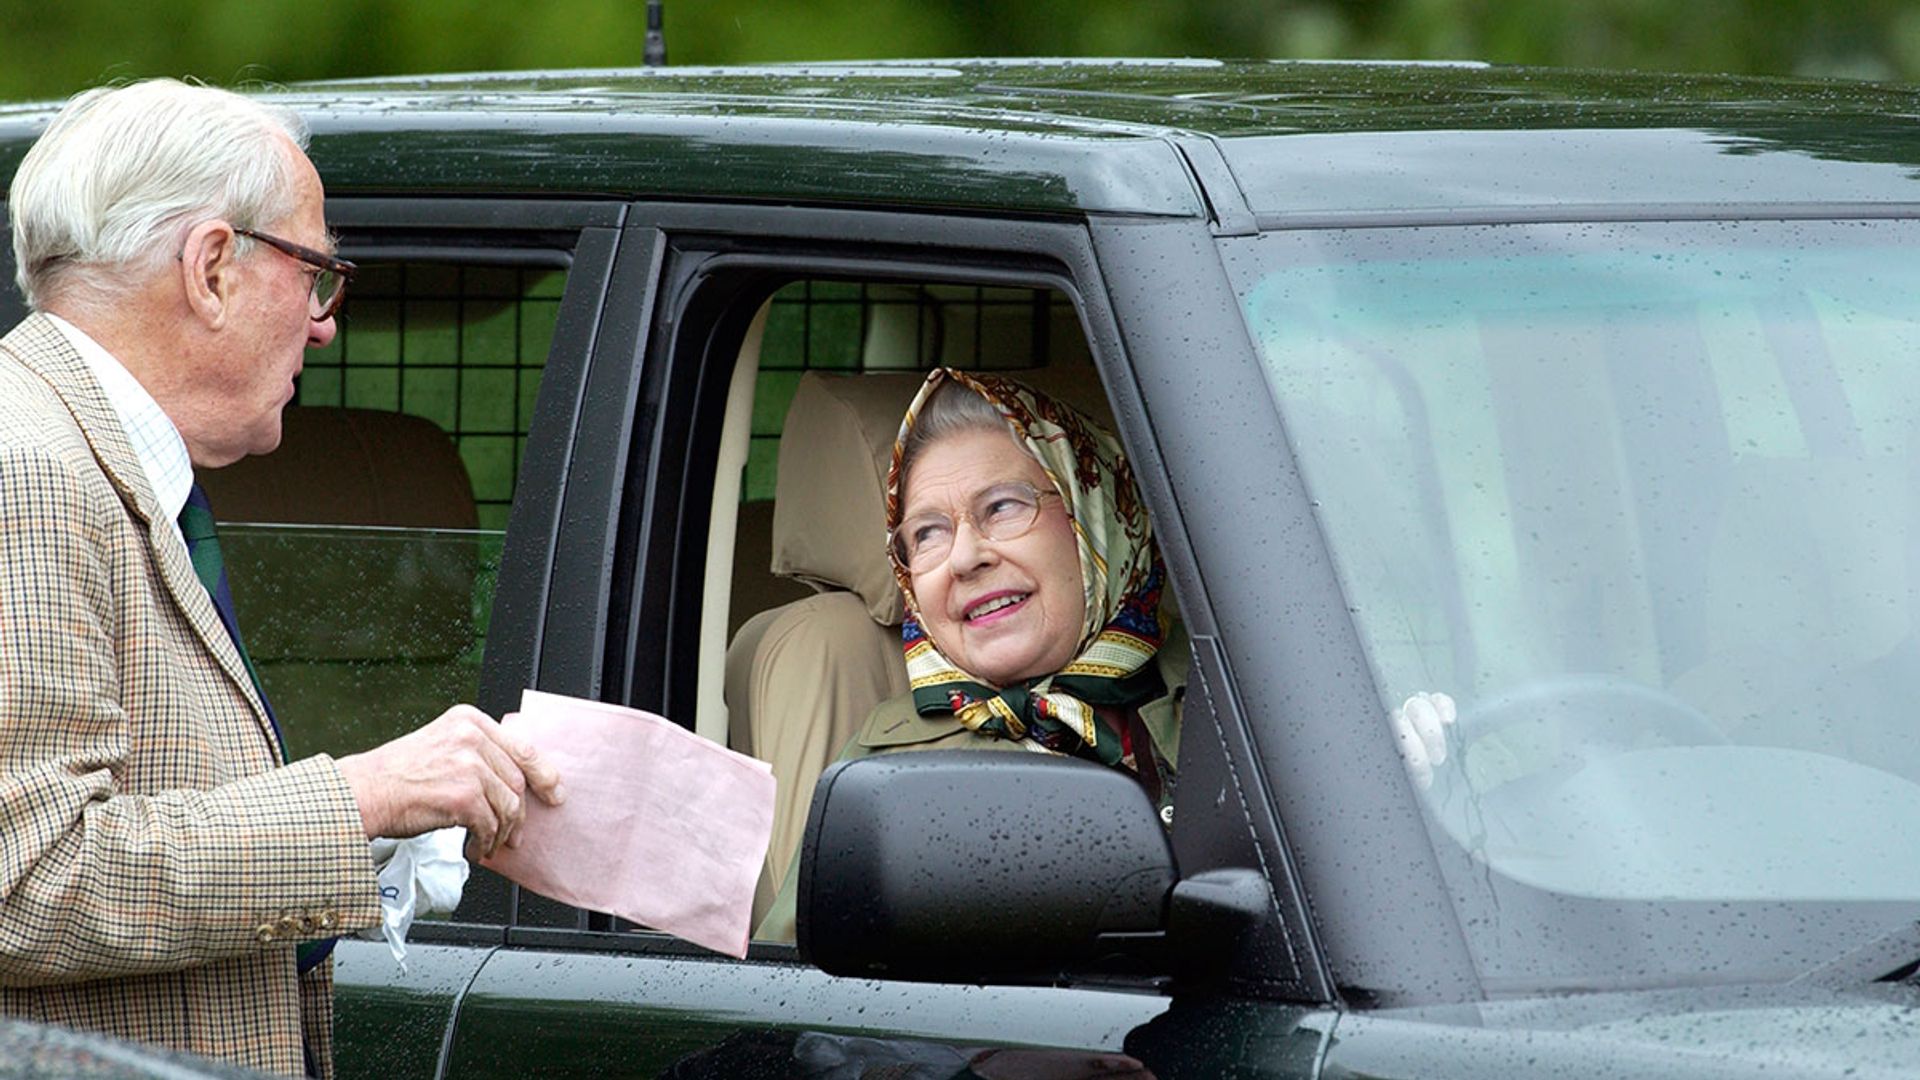 does the queen of england need a driver's license